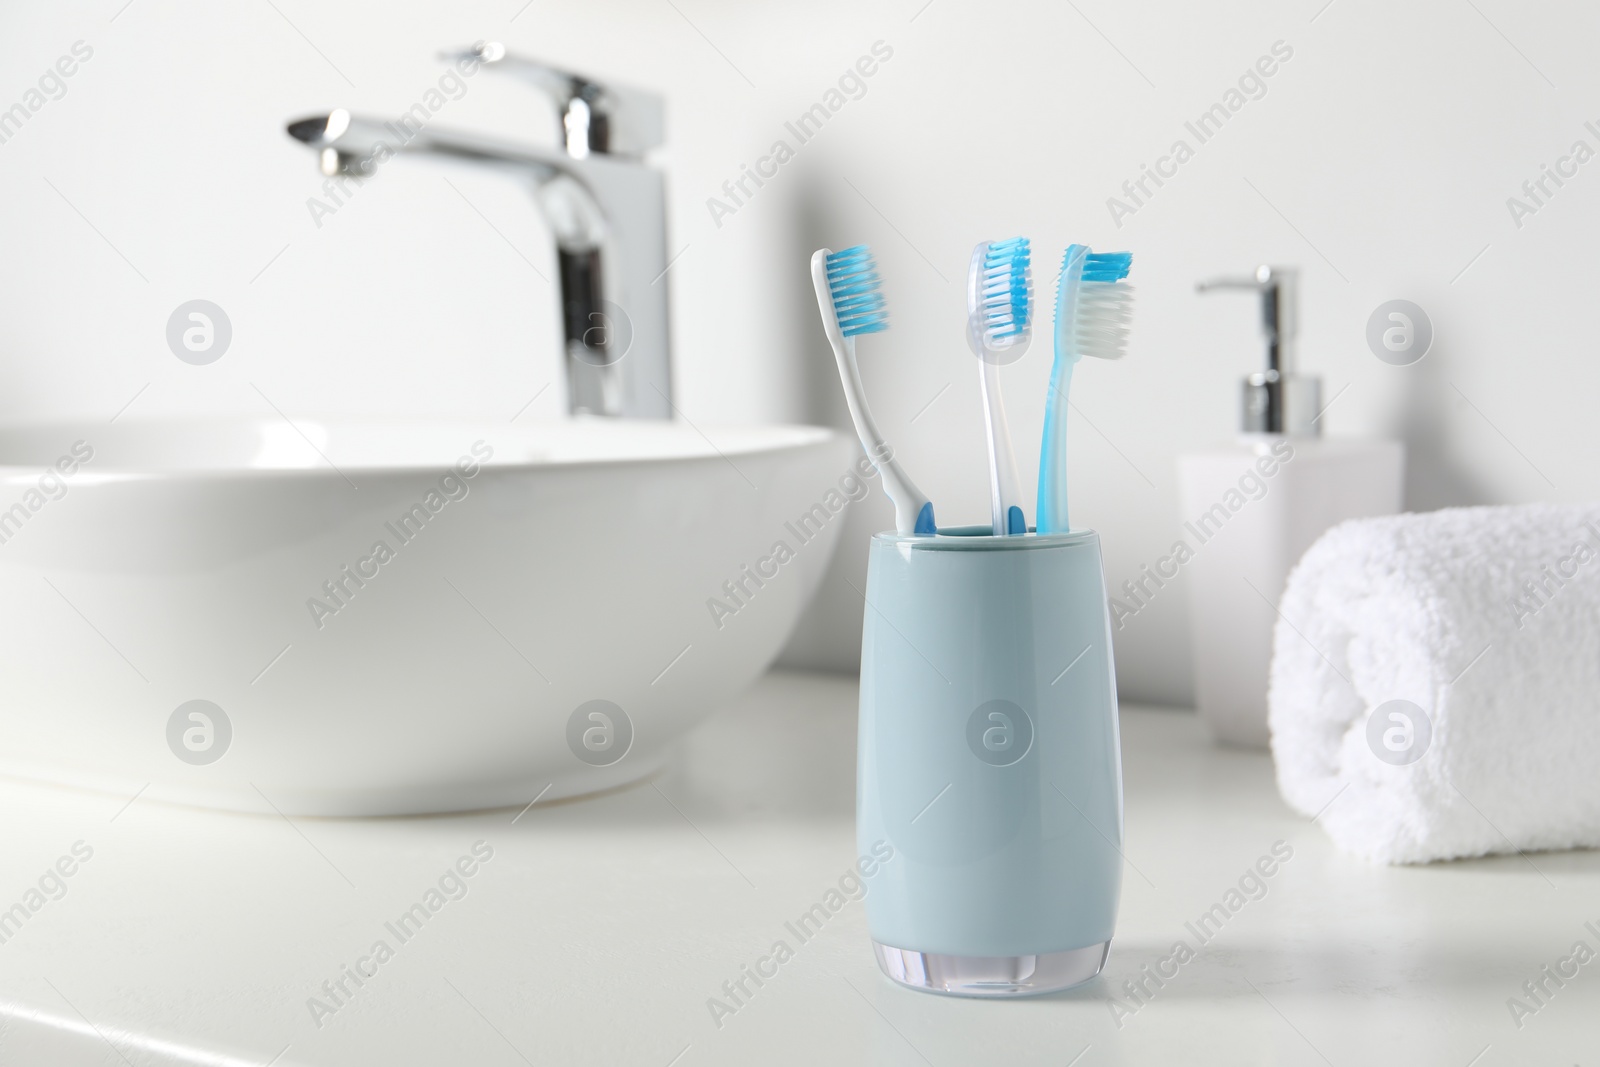 Photo of Holder with plastic toothbrushes on white countertop in bathroom, space for text